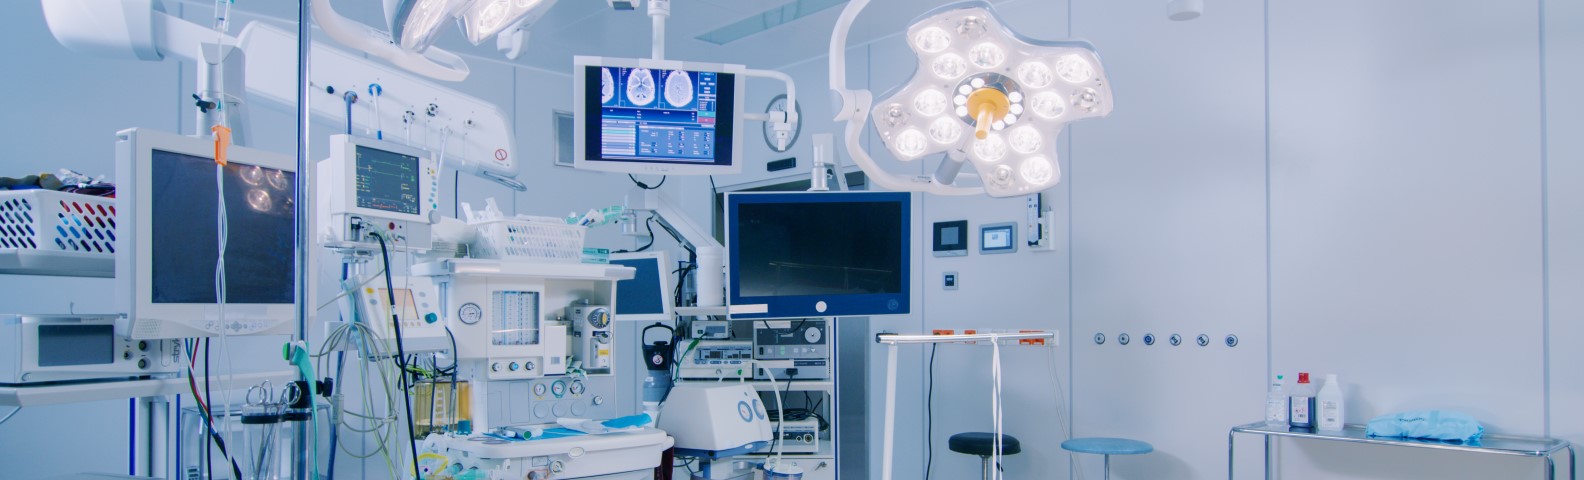 Hospital room with several technological medical devices